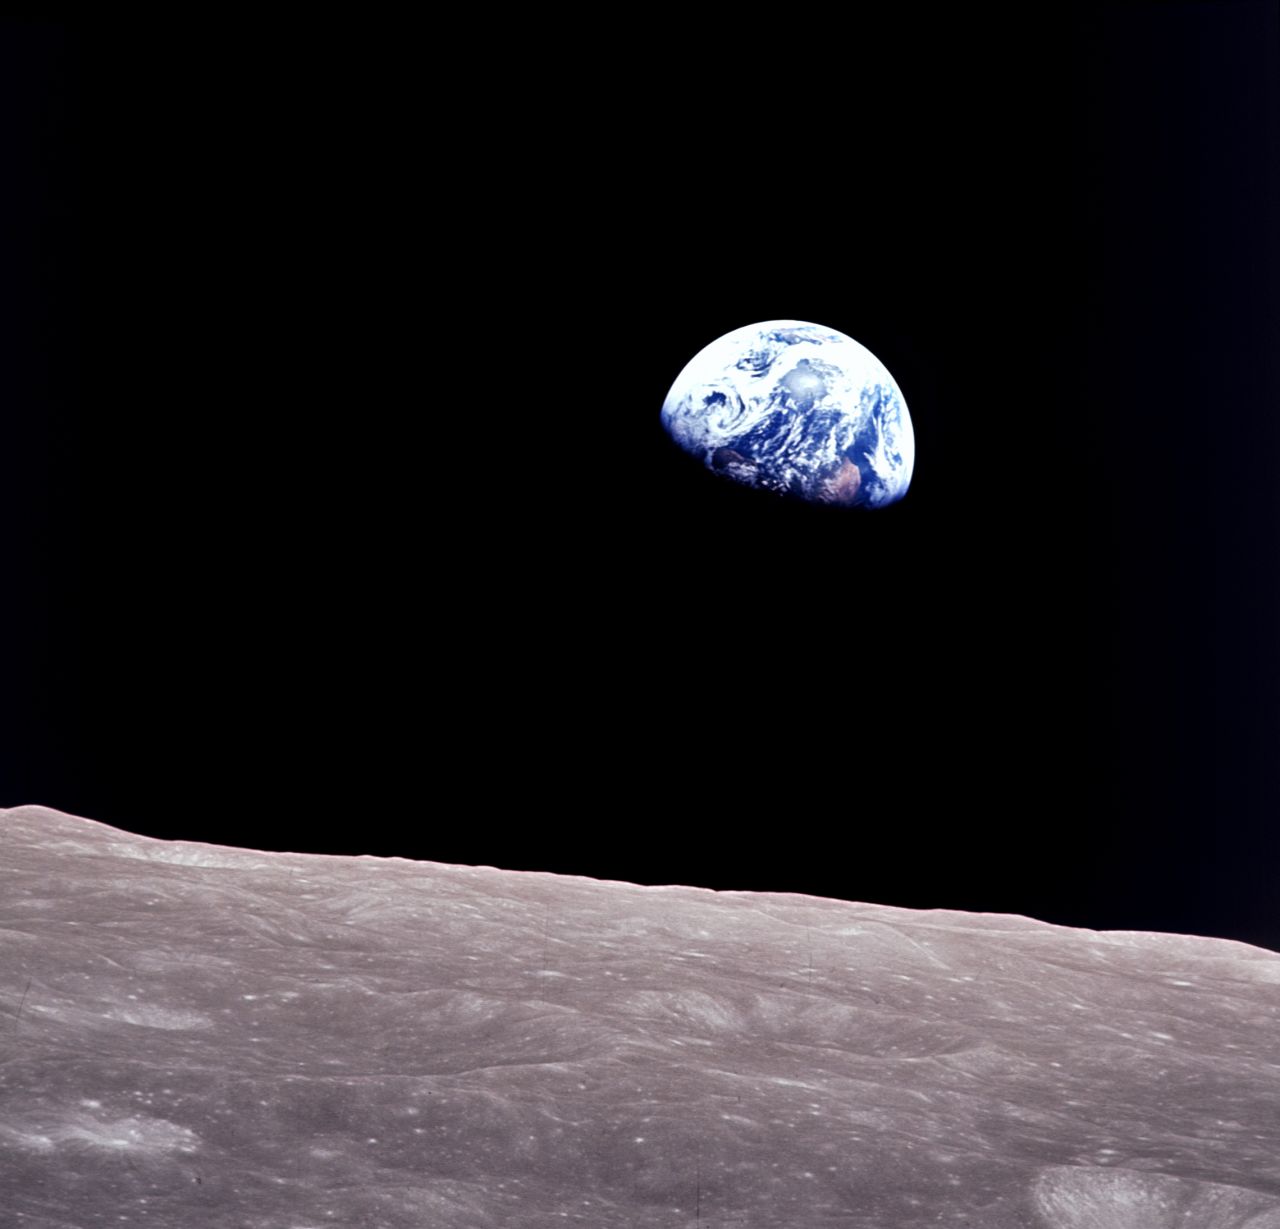 "Earthrise," taken by astronaut Bill Anders during the Apollo 8, is one of the most memorable images of the Space Age.